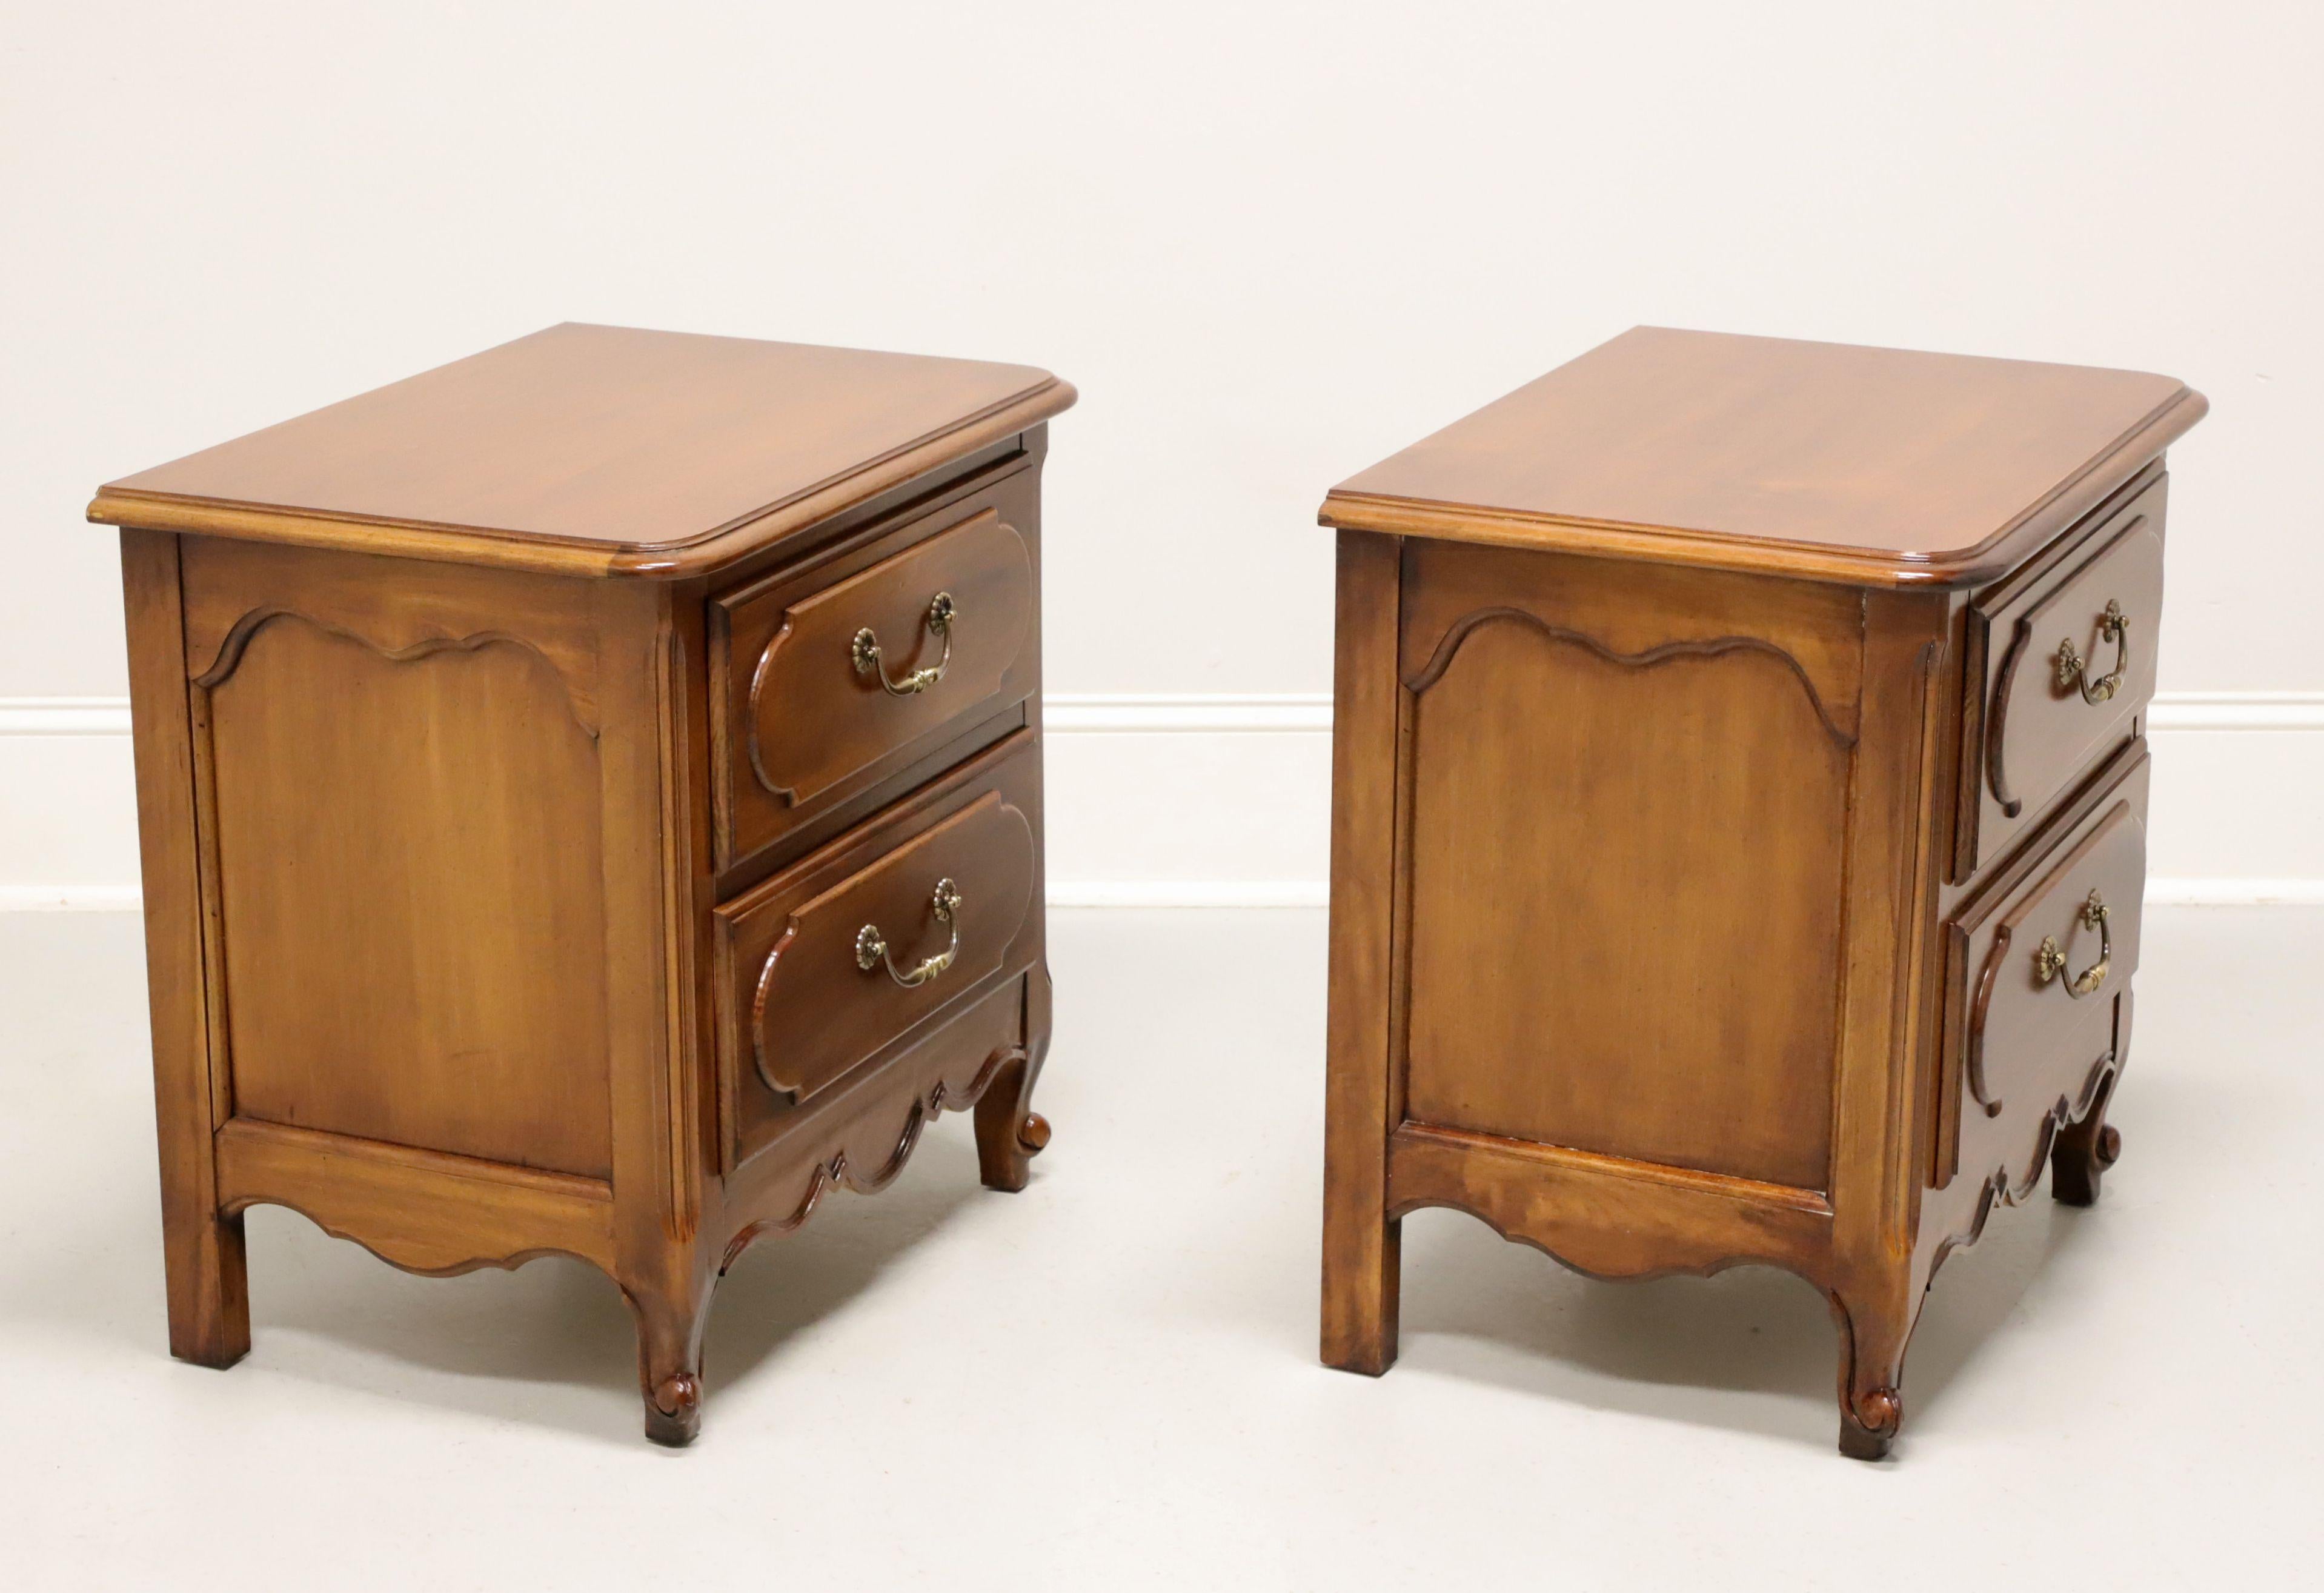 A pair of French Country Louis XV style nightstands by Henry Link, part of Lexington Furniture, from their Margaux Collection. Cherry wood with brass hardware, bevel edge to top, raised drawer fronts, carved apron, and scroll front feet. Features